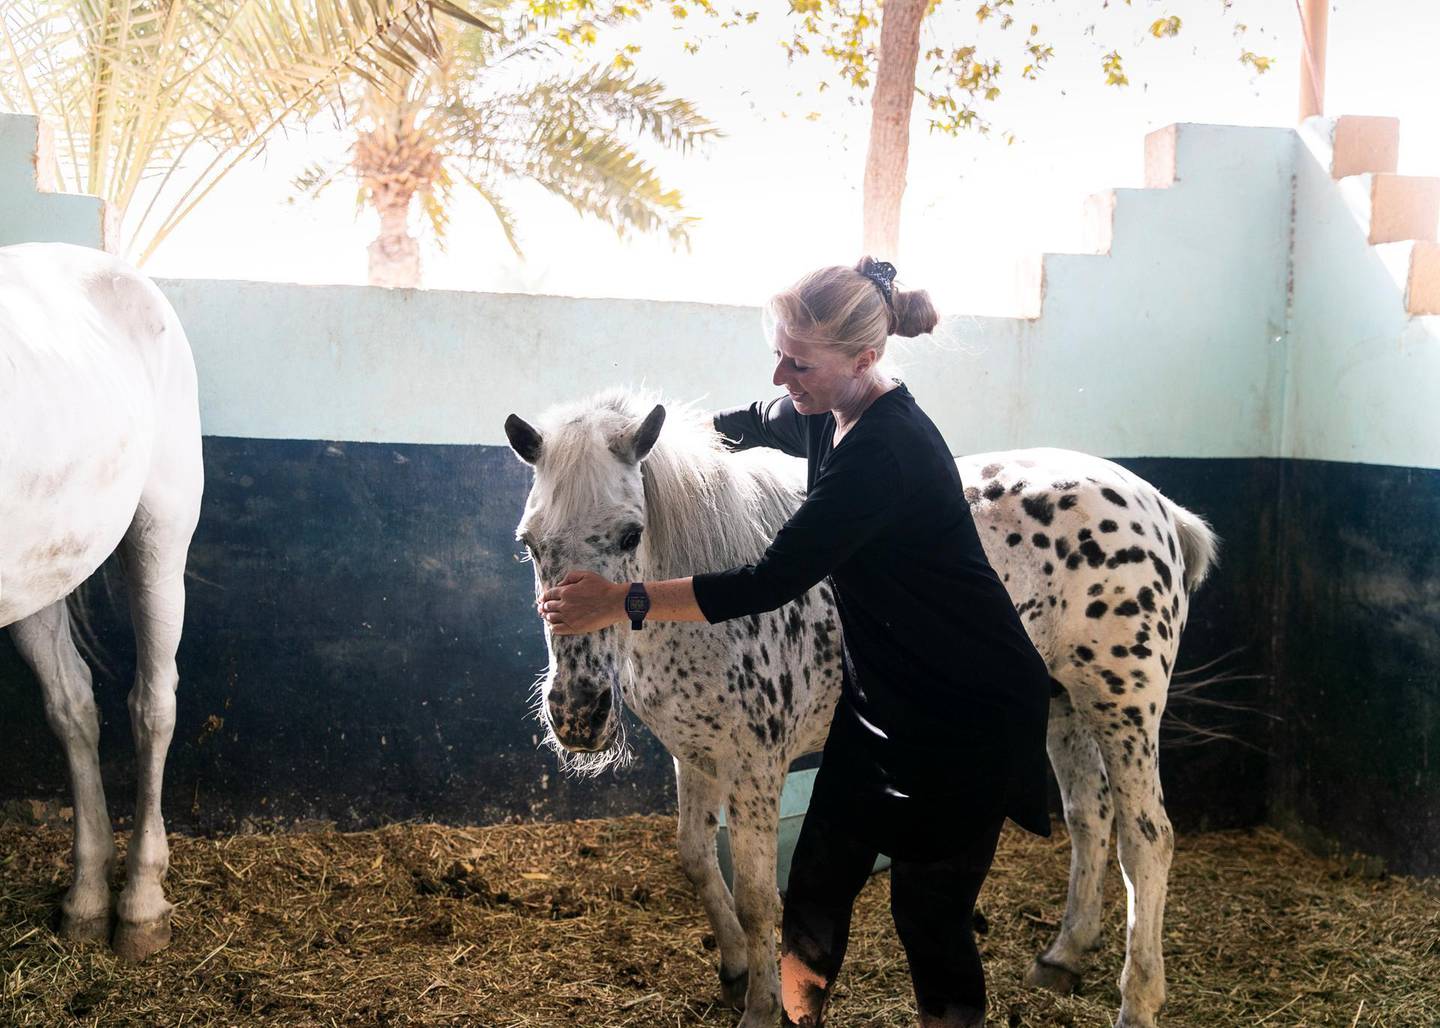 ABU DHABI, UNITED ARAB EMIRATES. 18 MARCH 2020.Yasmin Sayyed with Pebbles, a rescue horse. “Pebbles is 35 years old. She is shy, and always together with Antar. If you gain her trust, she is the most reliable horse.”, says Yasmin.Yasmin Sayyed runs Ride to Rescue. She has taken in 17 rescued horses who would normally be euthanized, and she tries to offset the cost of their care by offering the public healing sessions where they ride or walk with them. (Photo: Reem Mohammed/The National)Reporter:Section: